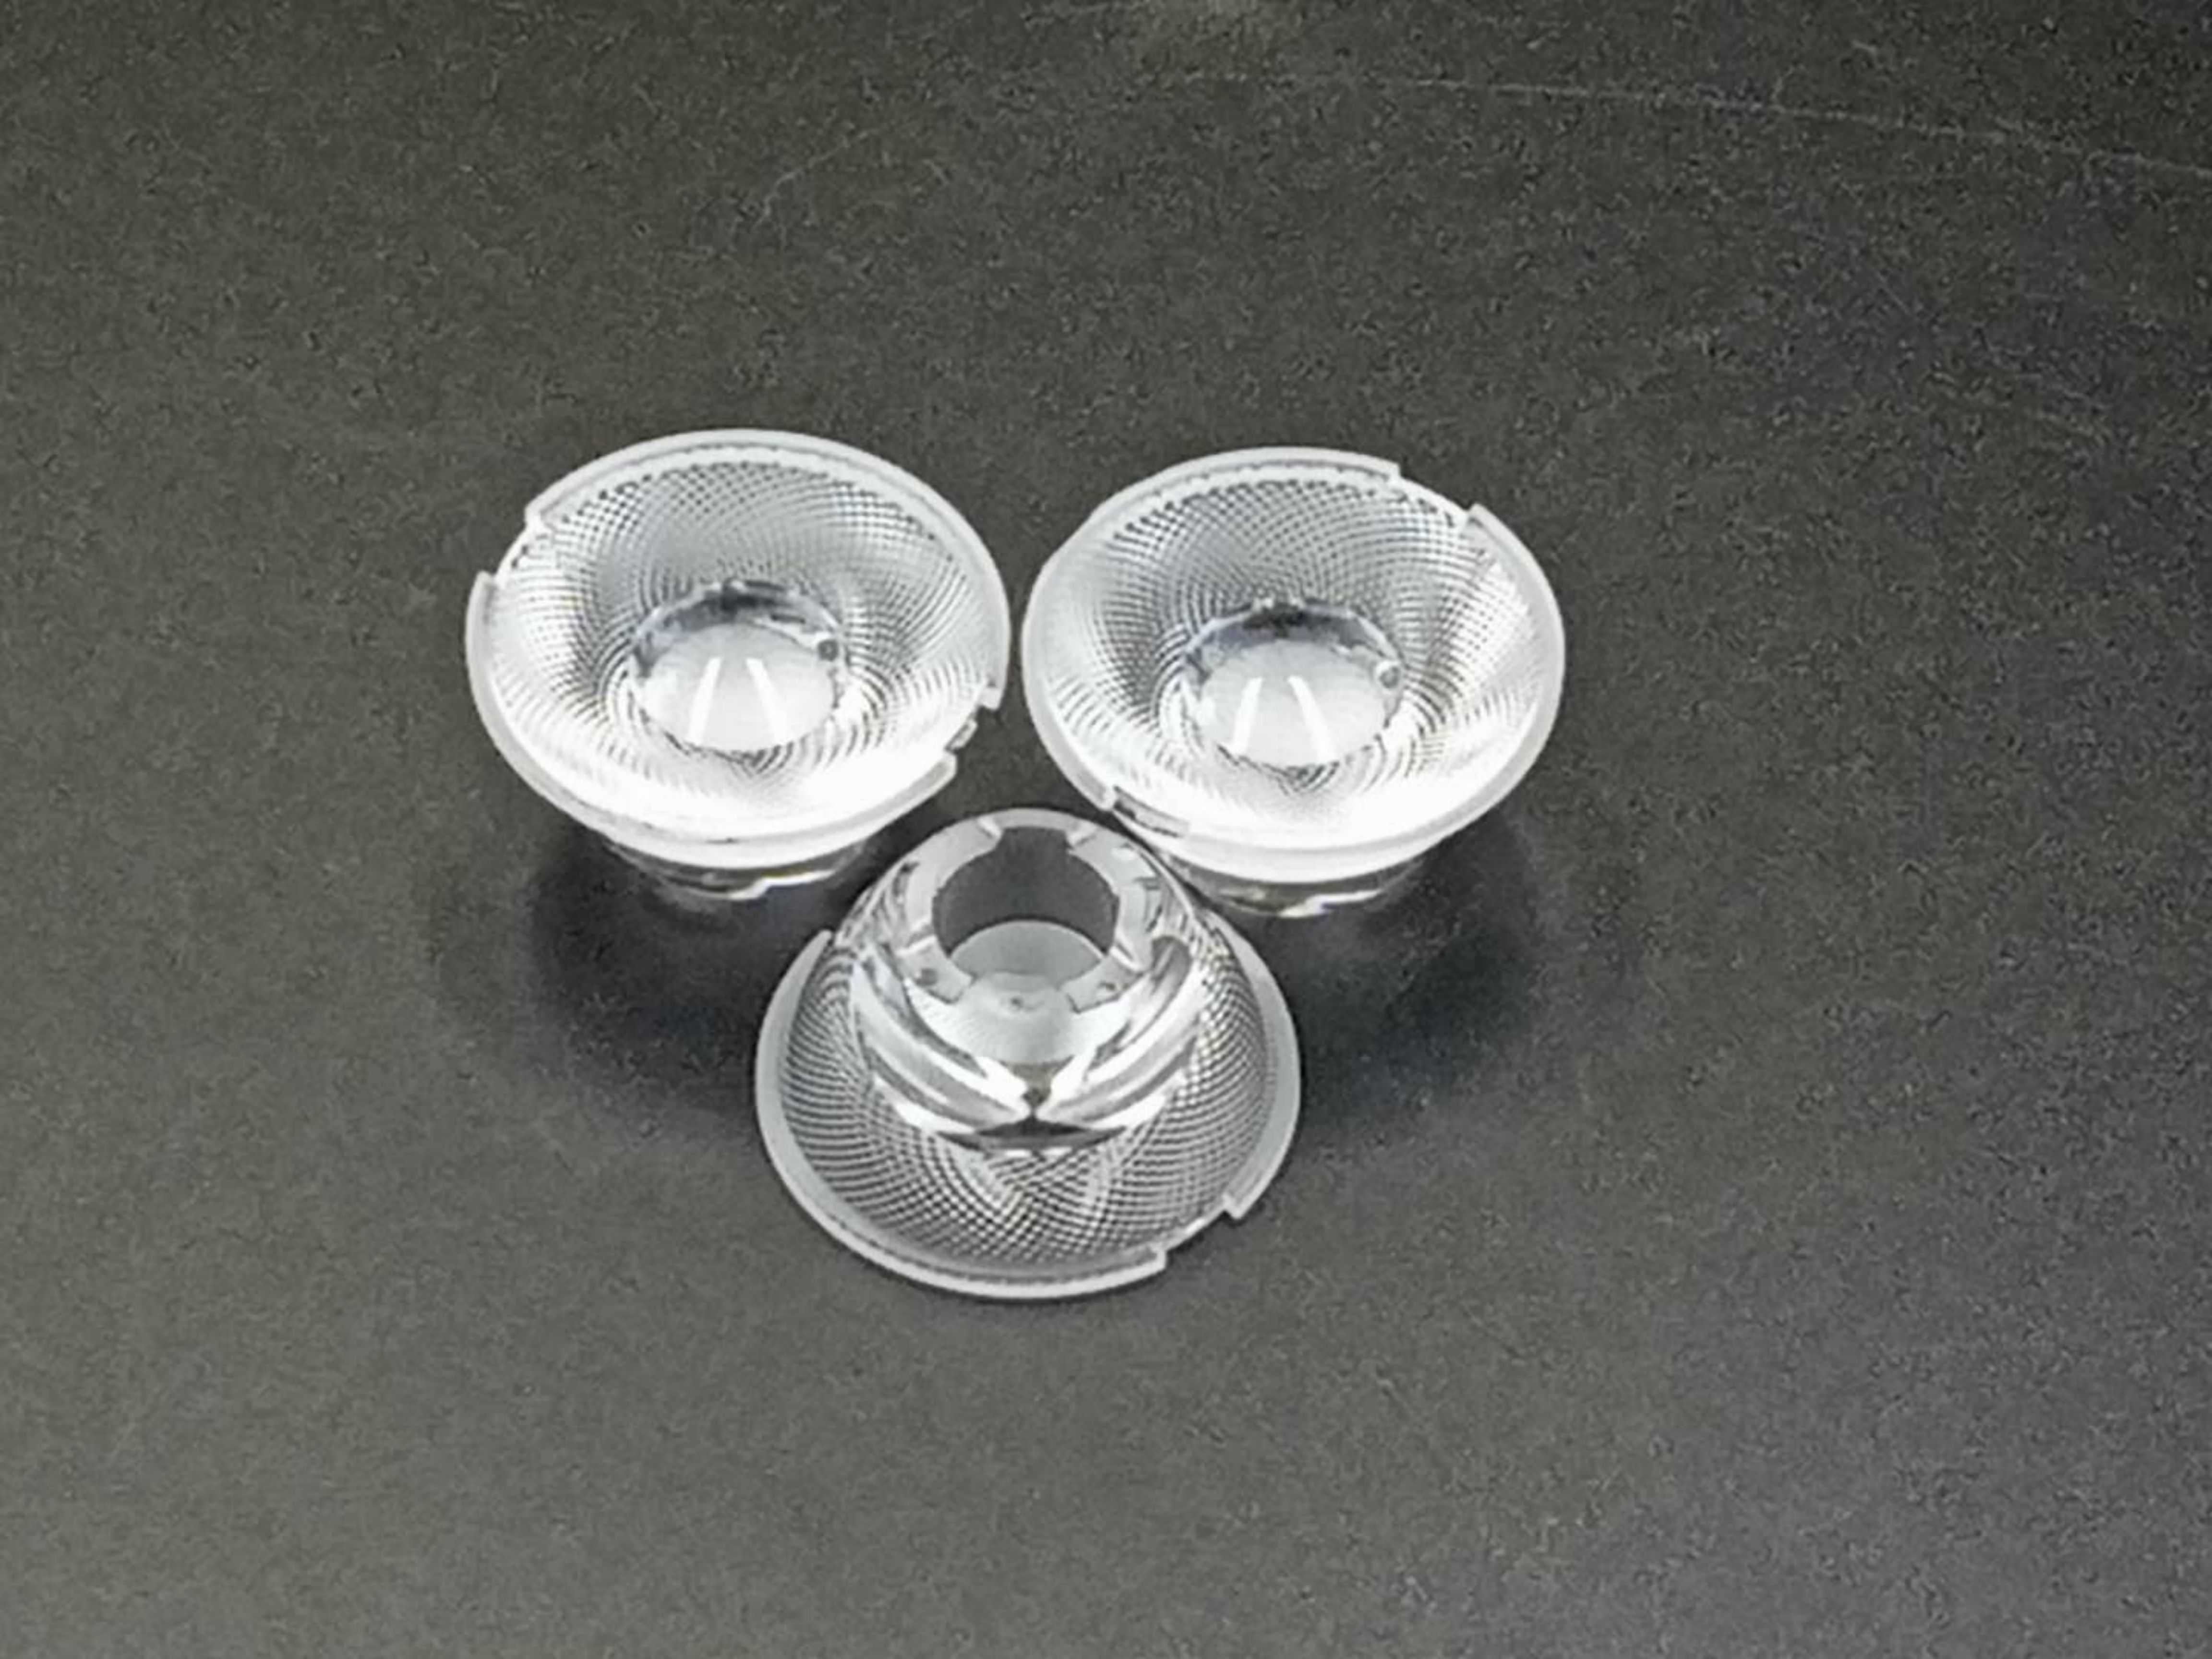 Optics lens Manufacturing Acrylic lens Led Commercial Indoor lighting COB Mold Injection lens 